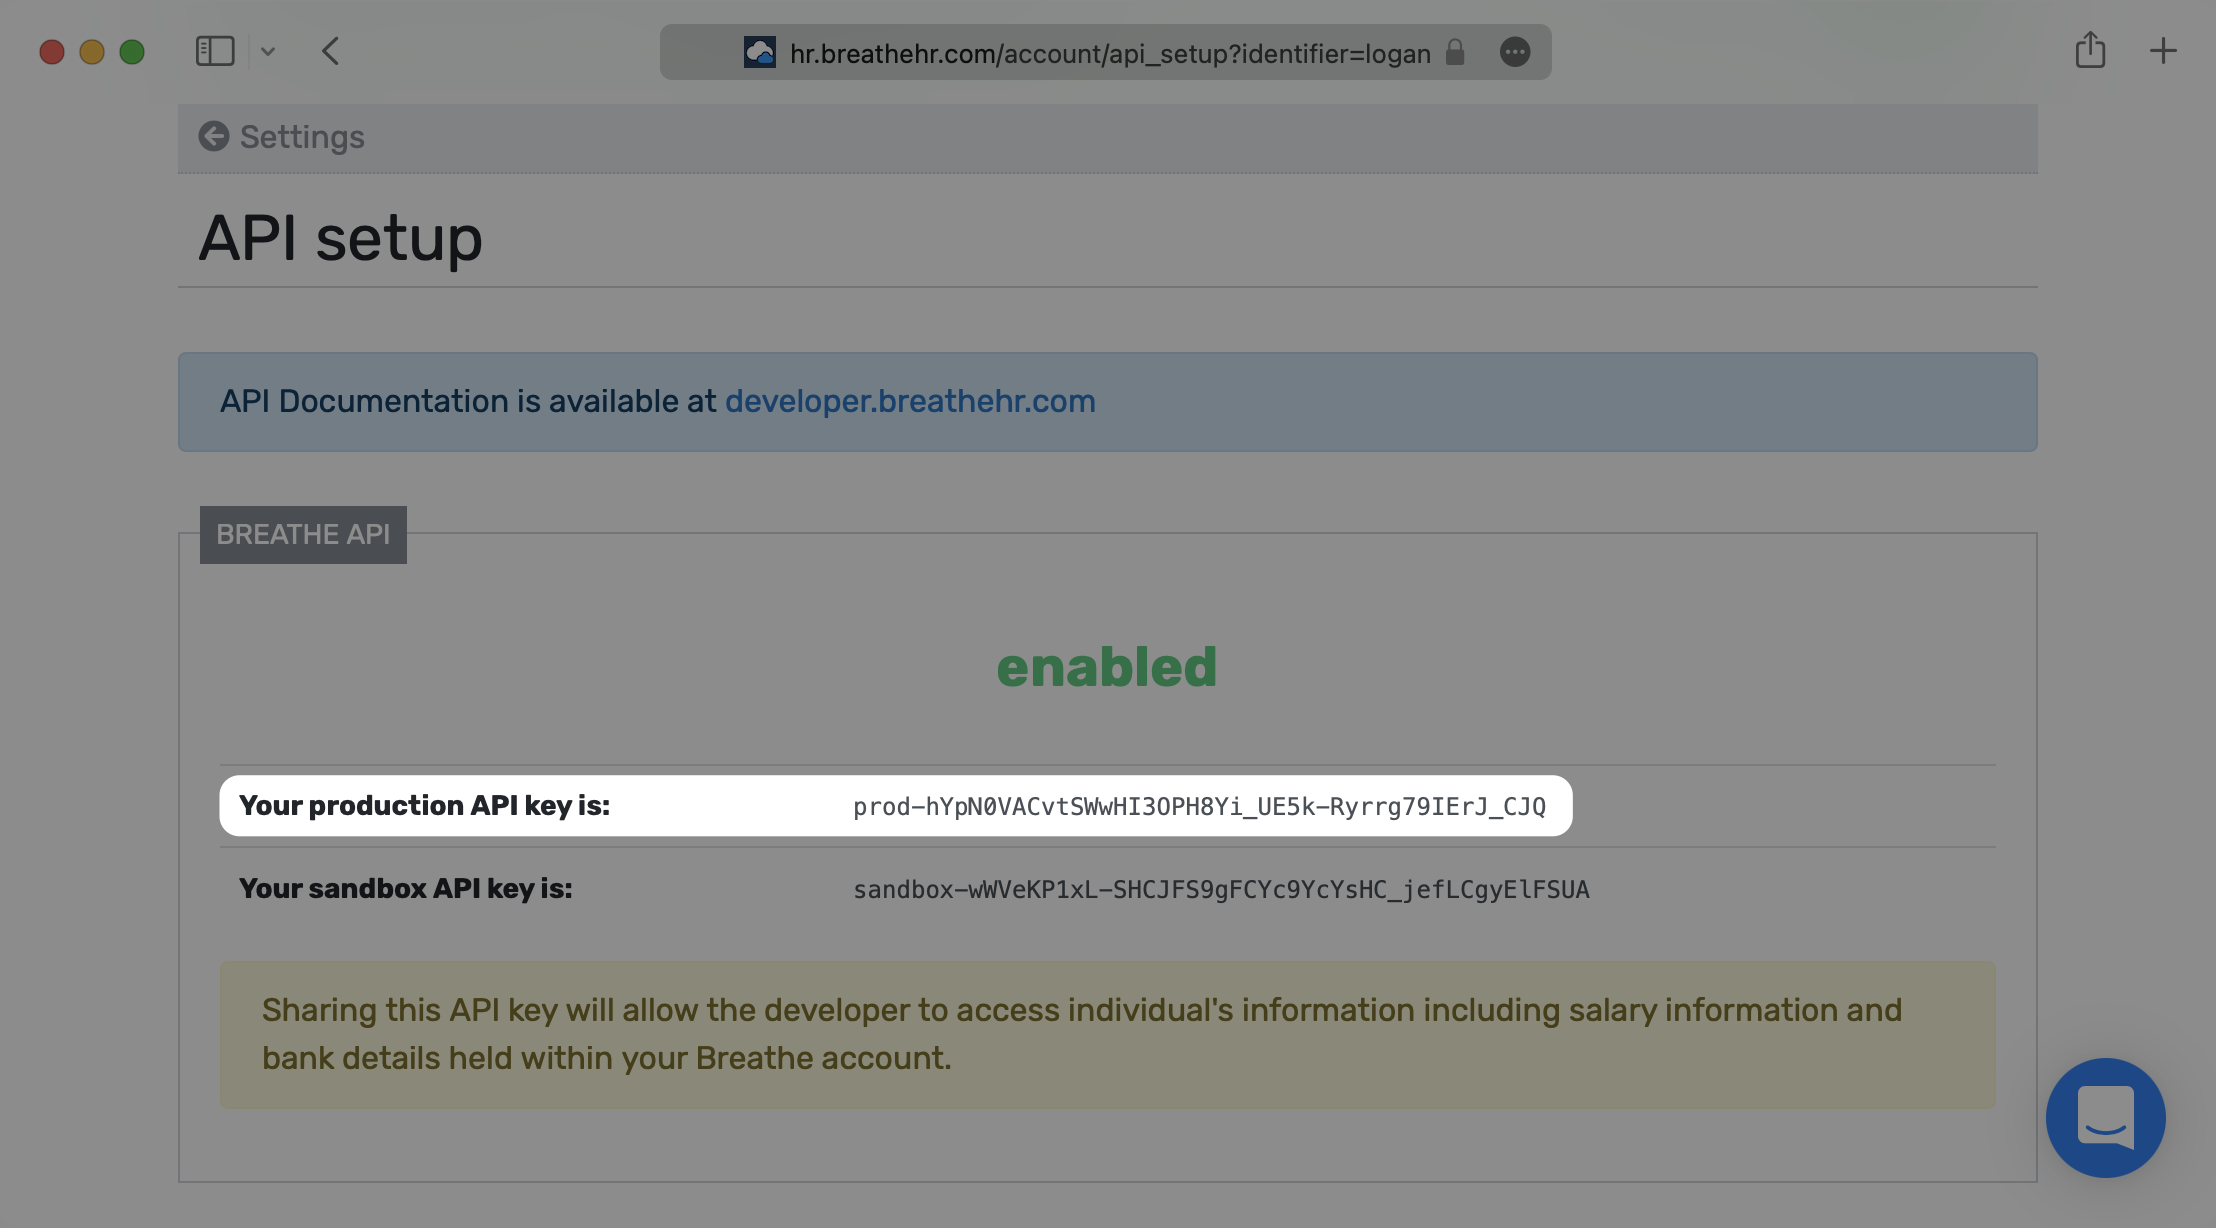 A screenshot showing where to select the production API key in the "API Setup" section of the Breathe HR dashboard.